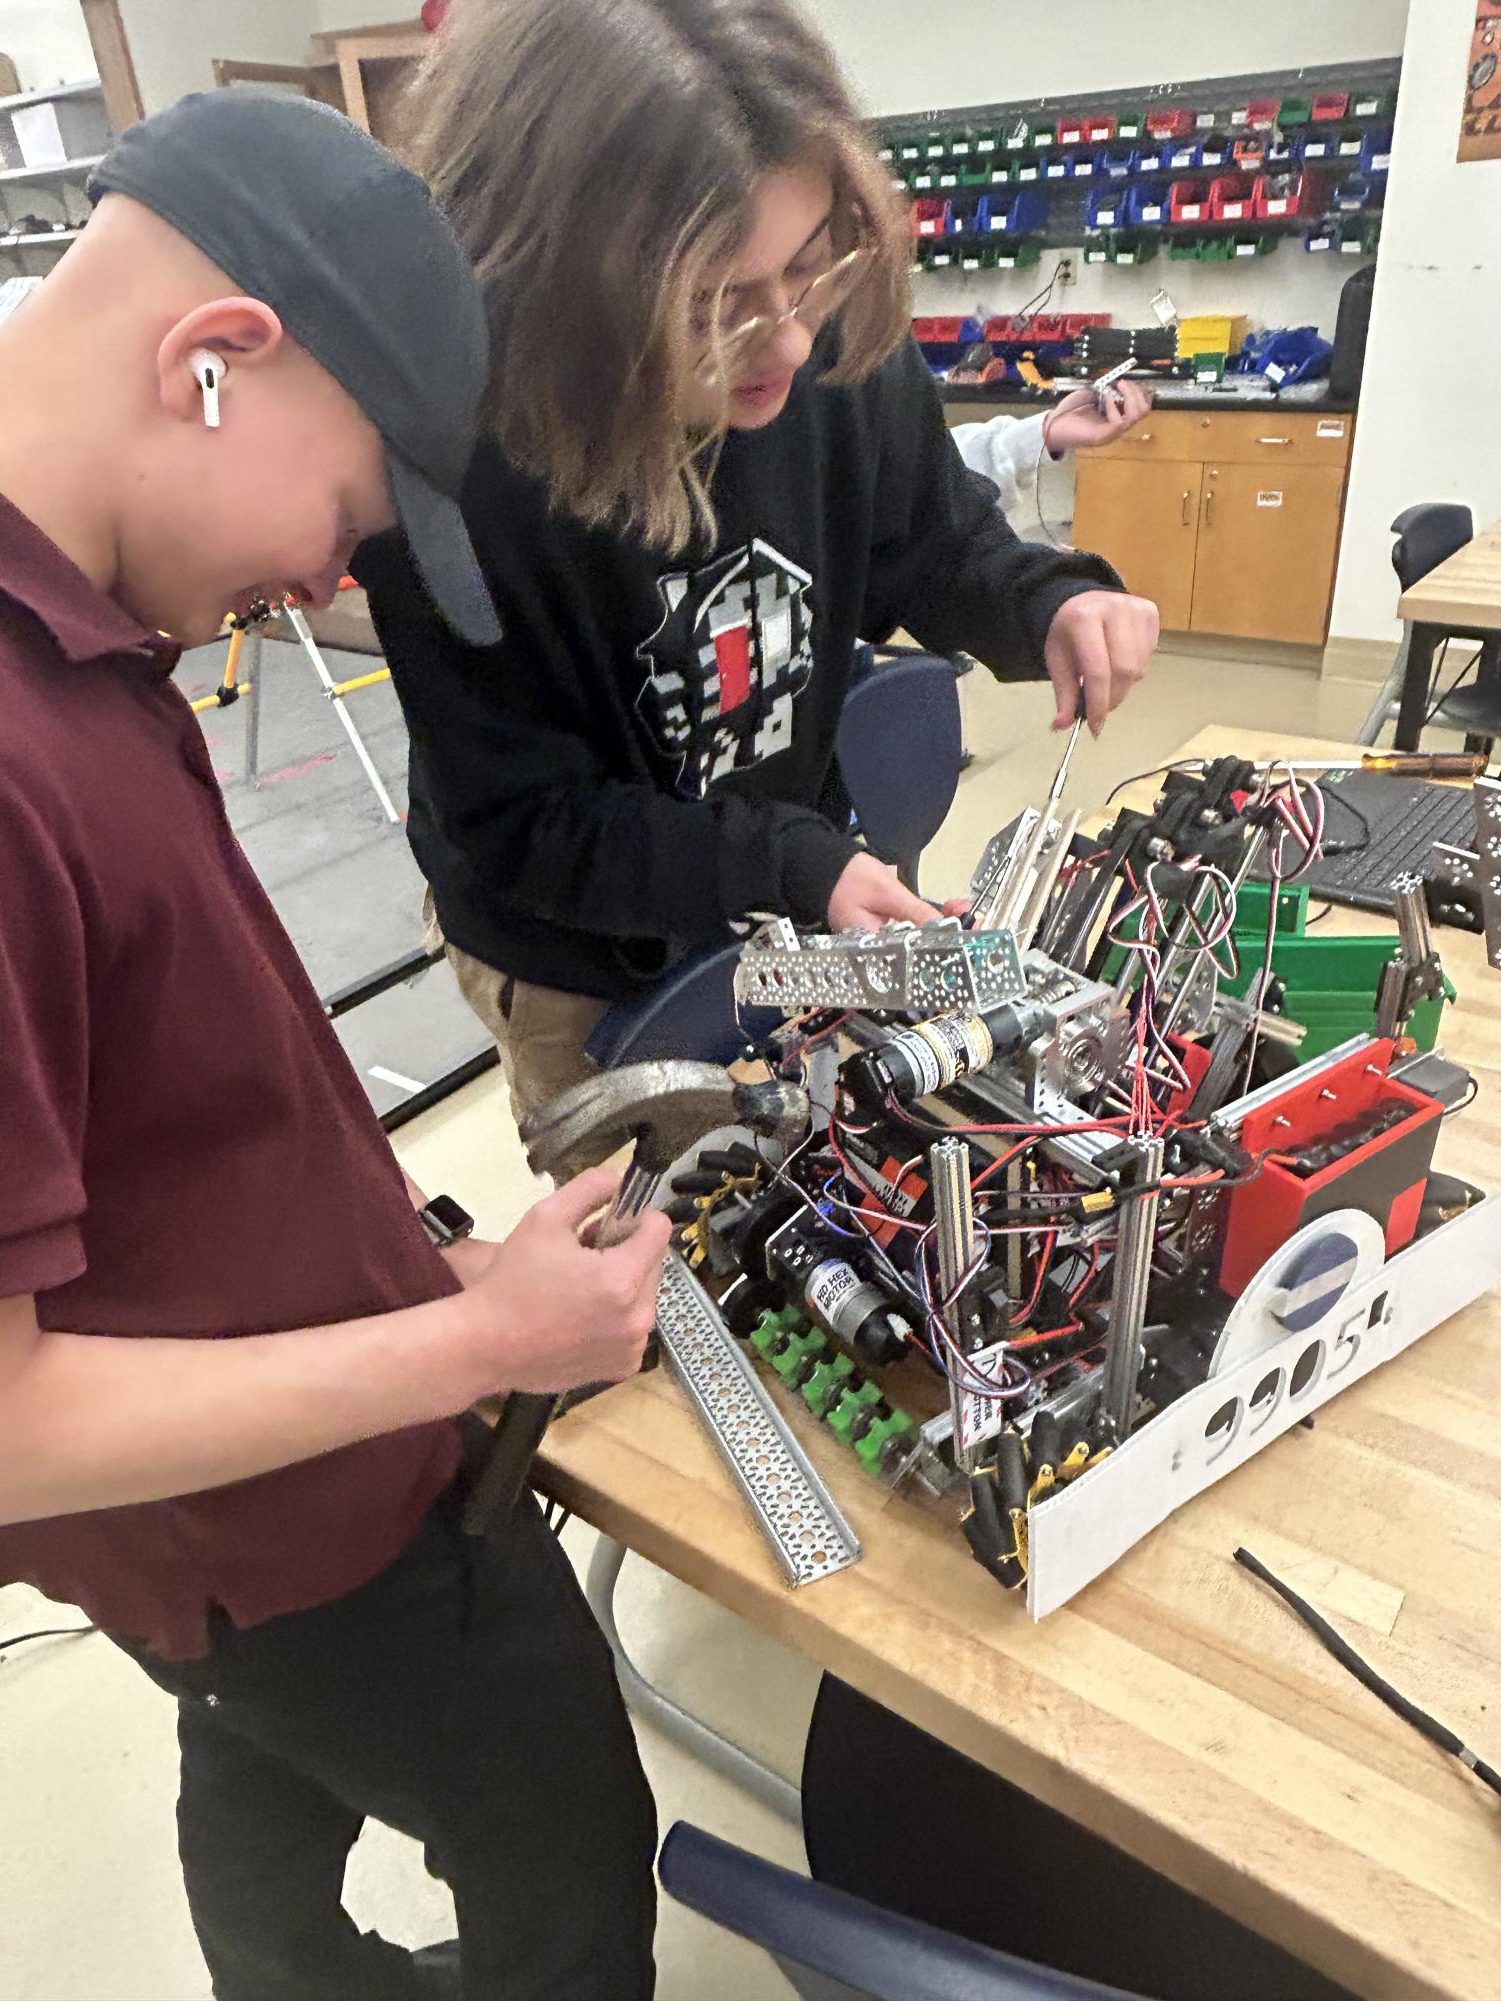 Andy Mai ‘24 and Azael Mayer ‘24 working together on Rampire’s Robot